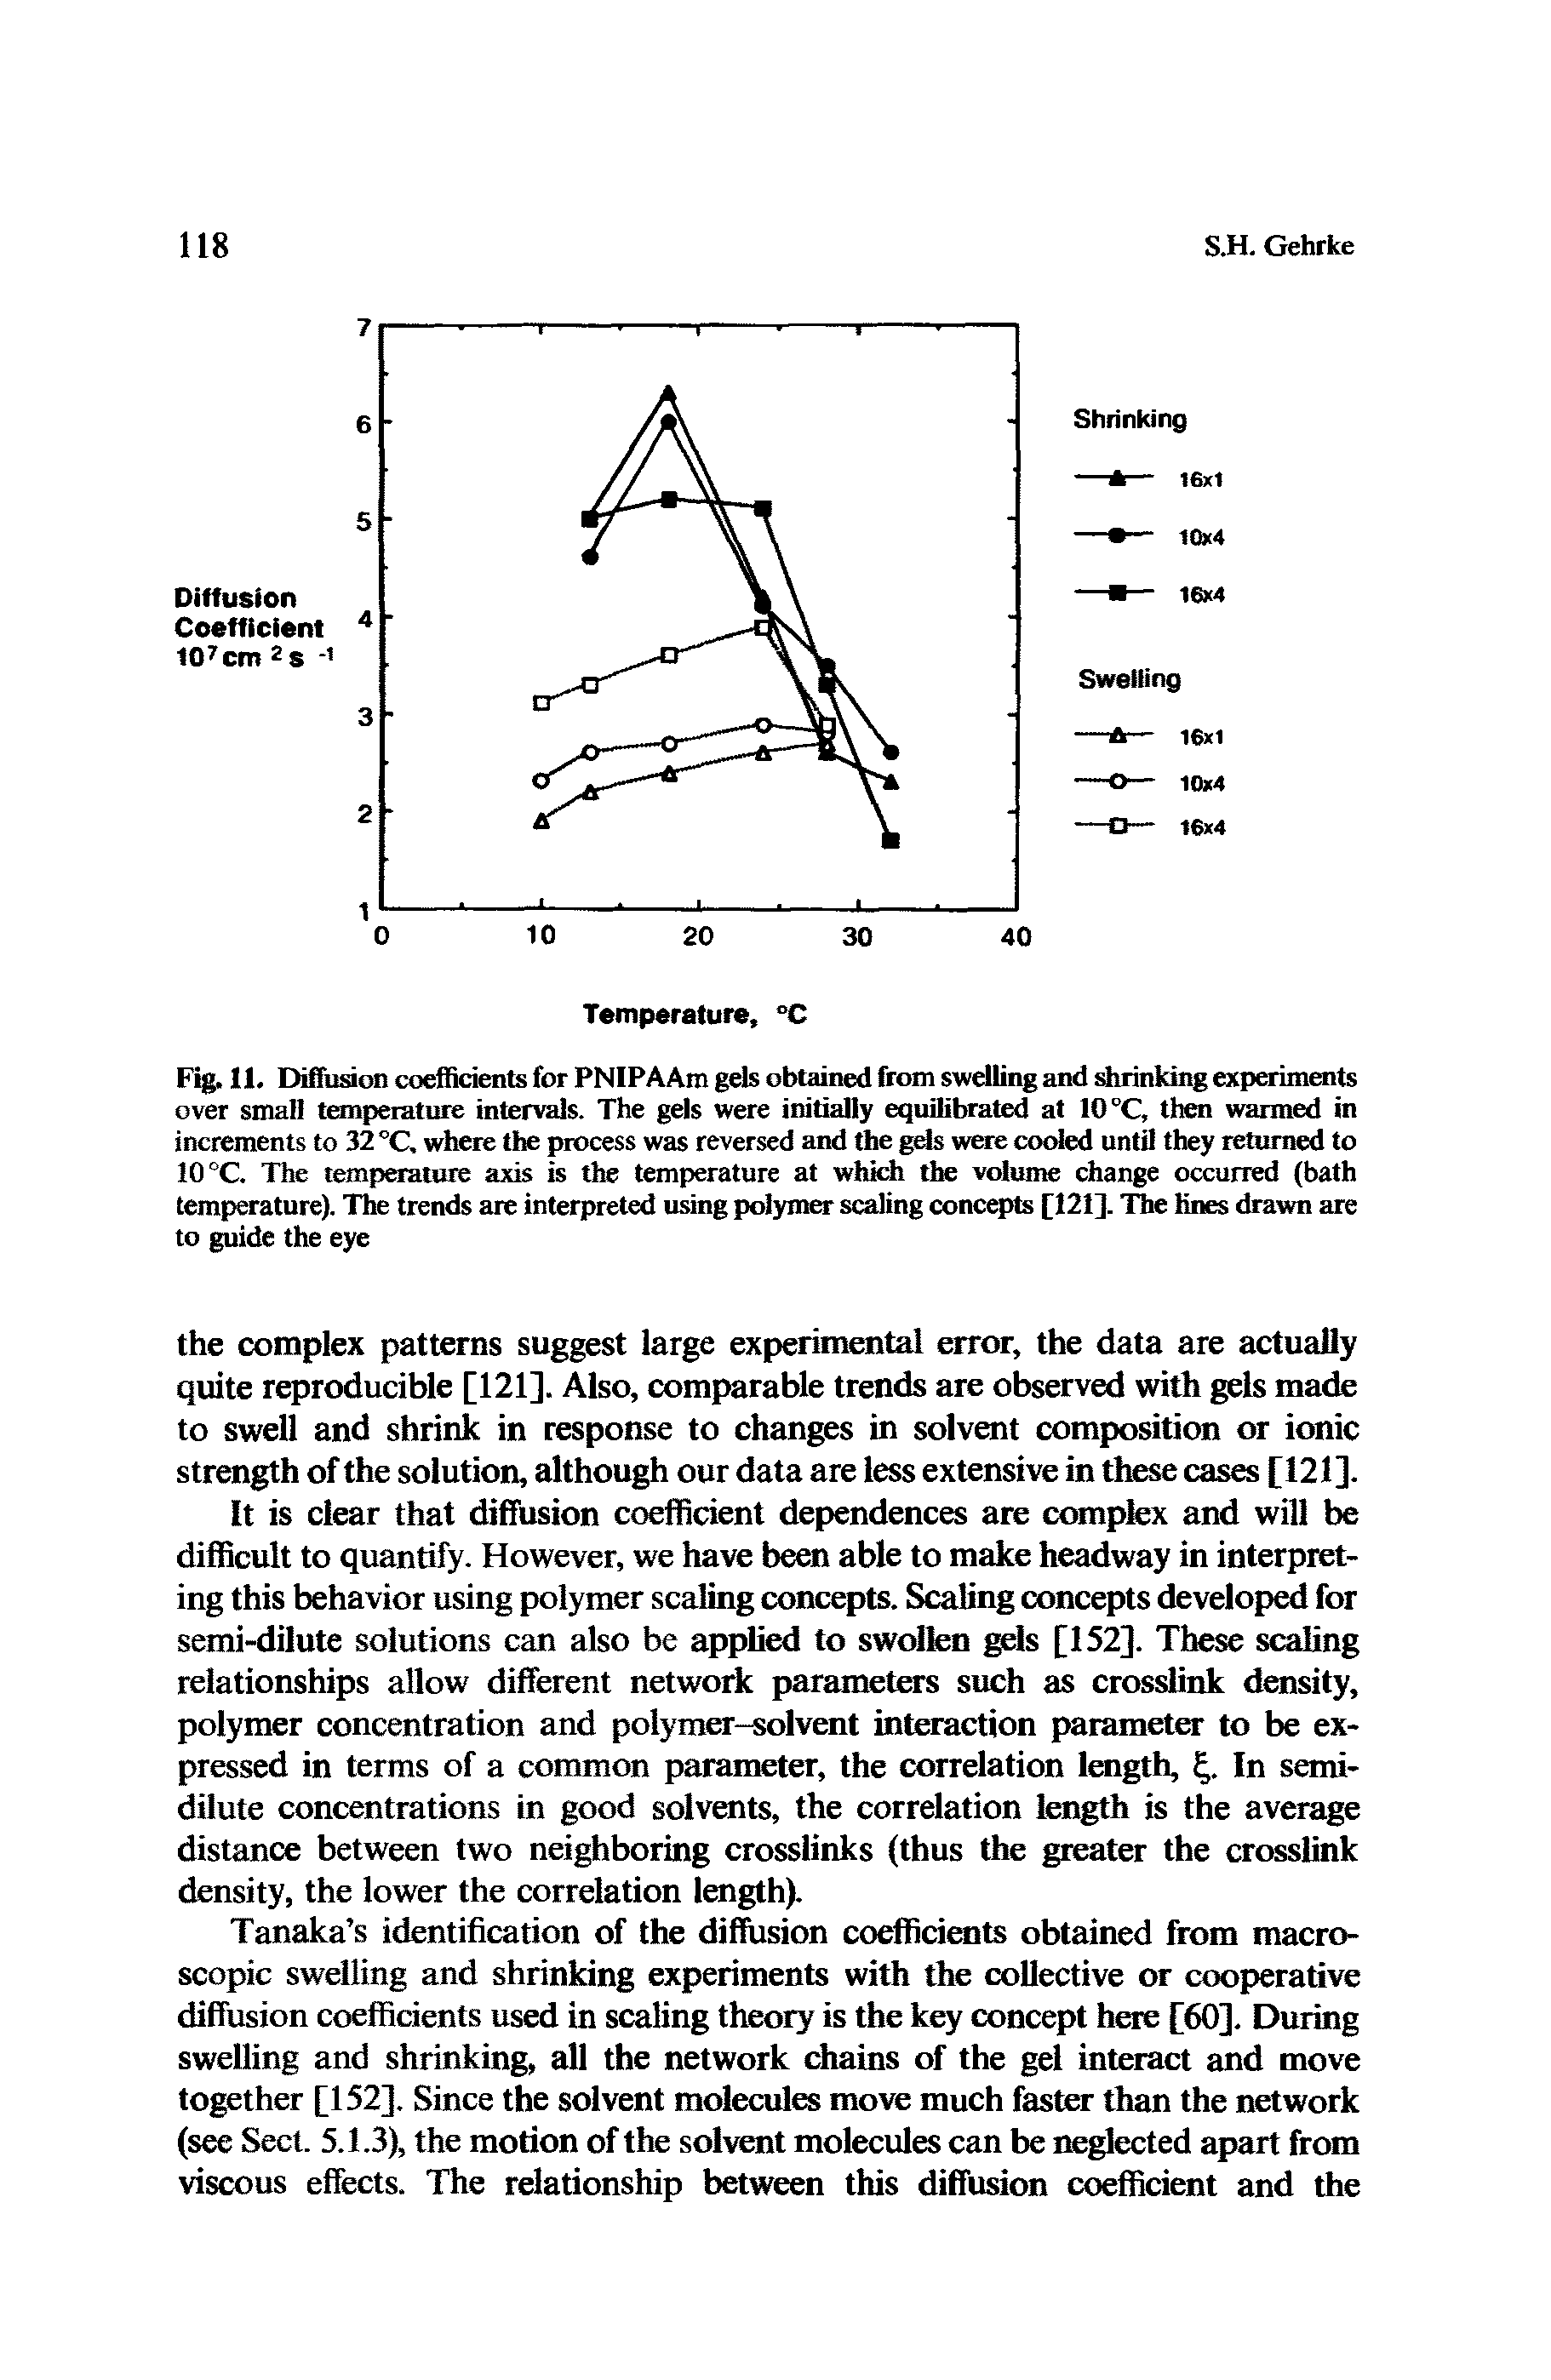 Fig. 11. Diffusion coefficients for PNIPAAm gels obtained from swelling and shrinking experiments over small temperature intervals. The gels were initially equilibrated at 10 °C, then wanned in increments to 32 °C, where the process was reversed and the gels were cooled until they returned to 10 °C. The temperature axis is the temperature at which the volume change occurred (bath temperature). The trends are interpreted using polymer scaling concepts [121]. The lines drawn are to guide the eye...